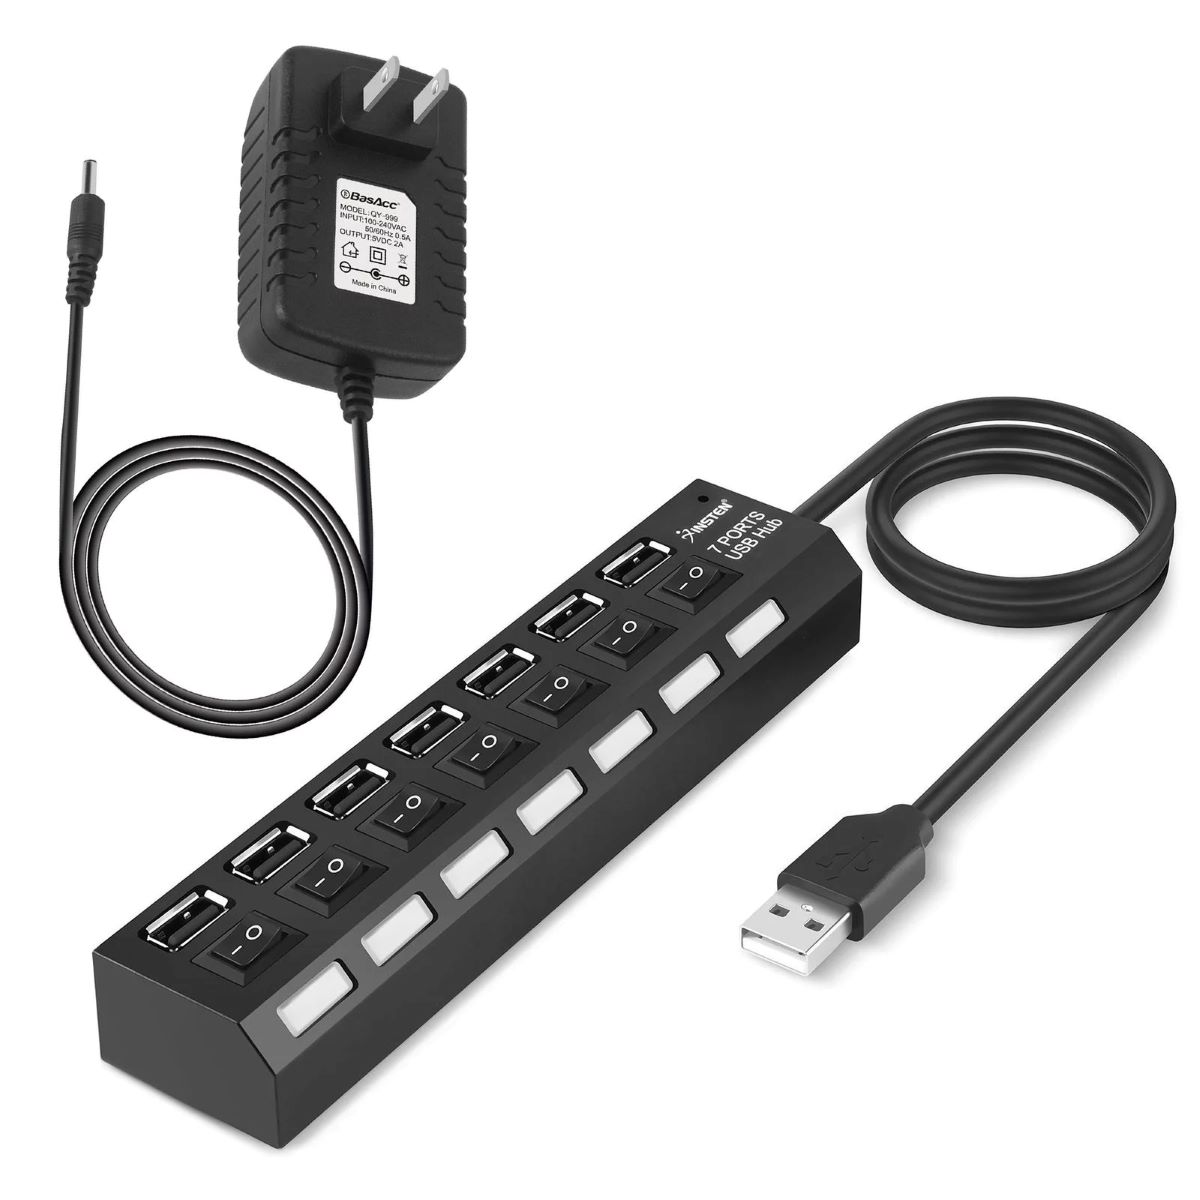 Why Does A USB Hub Need A Power Adapter